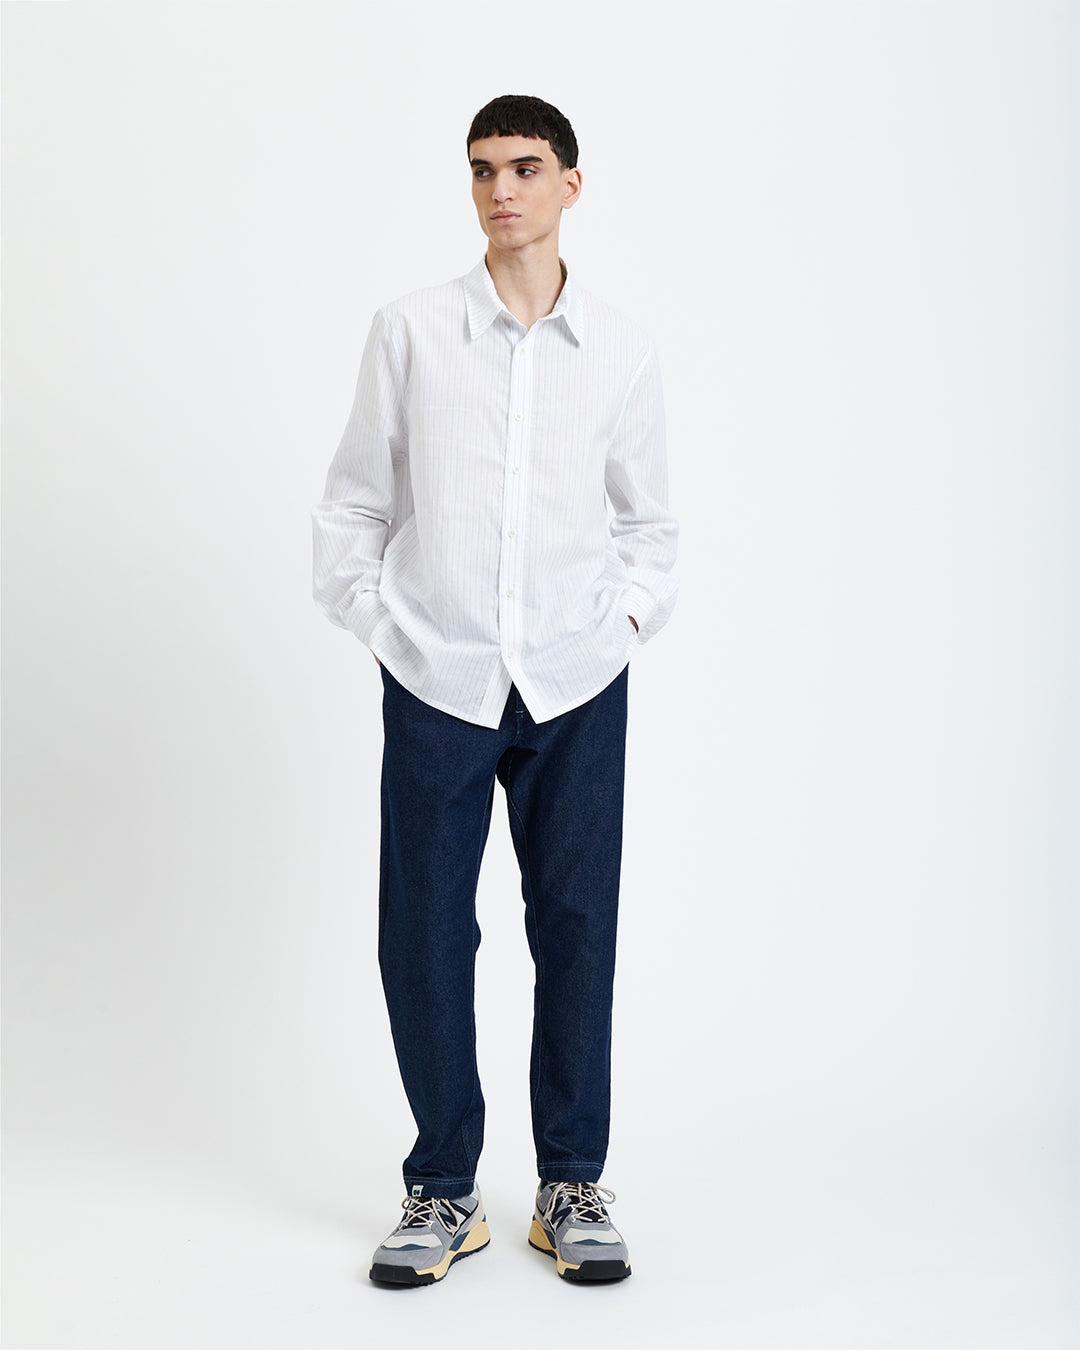 New Optimist menswear Primo | Relaxed pinstripe shirt Blouse